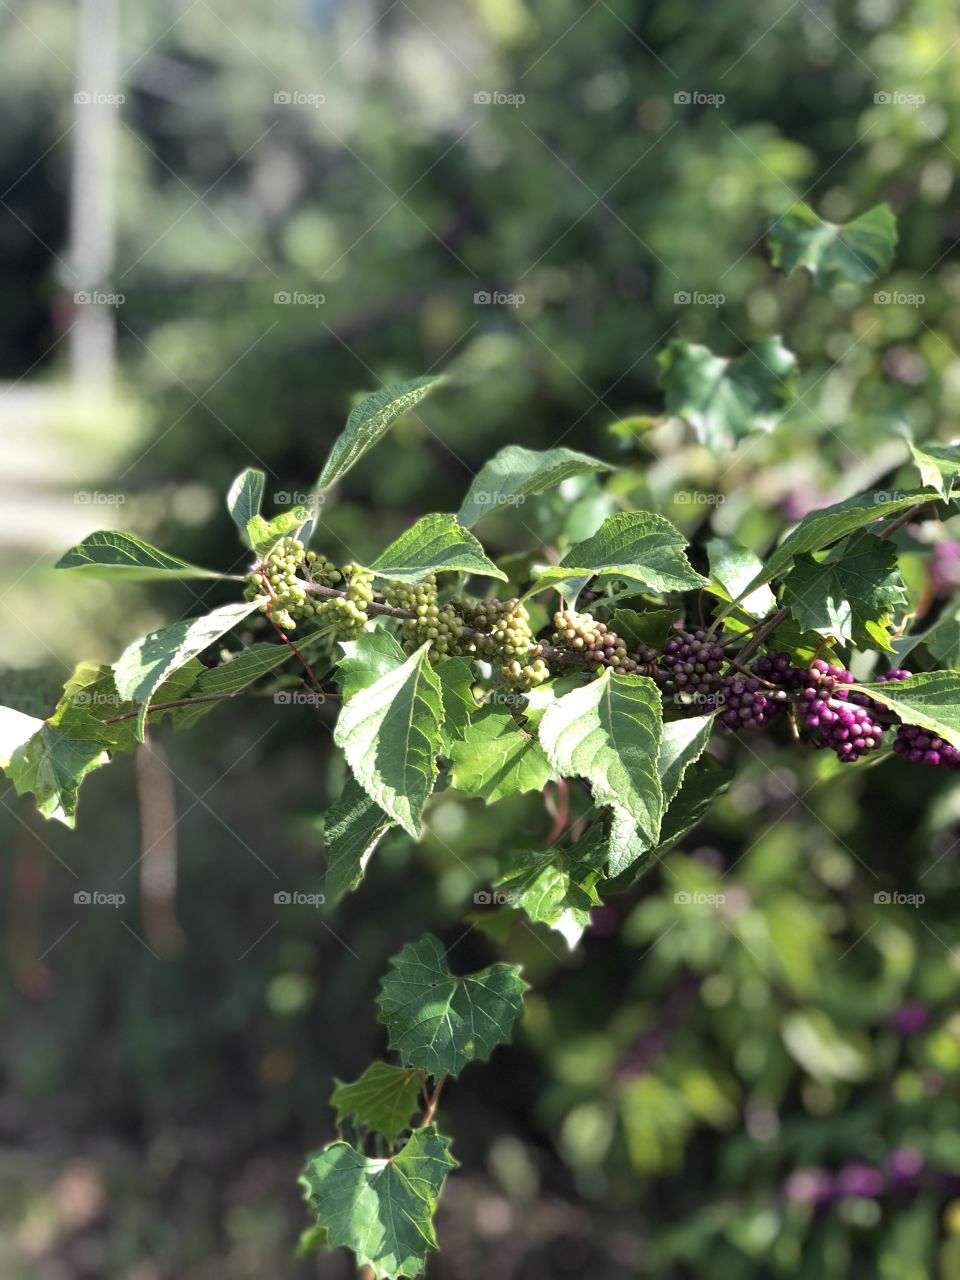 Wild berries ripening from green to purple